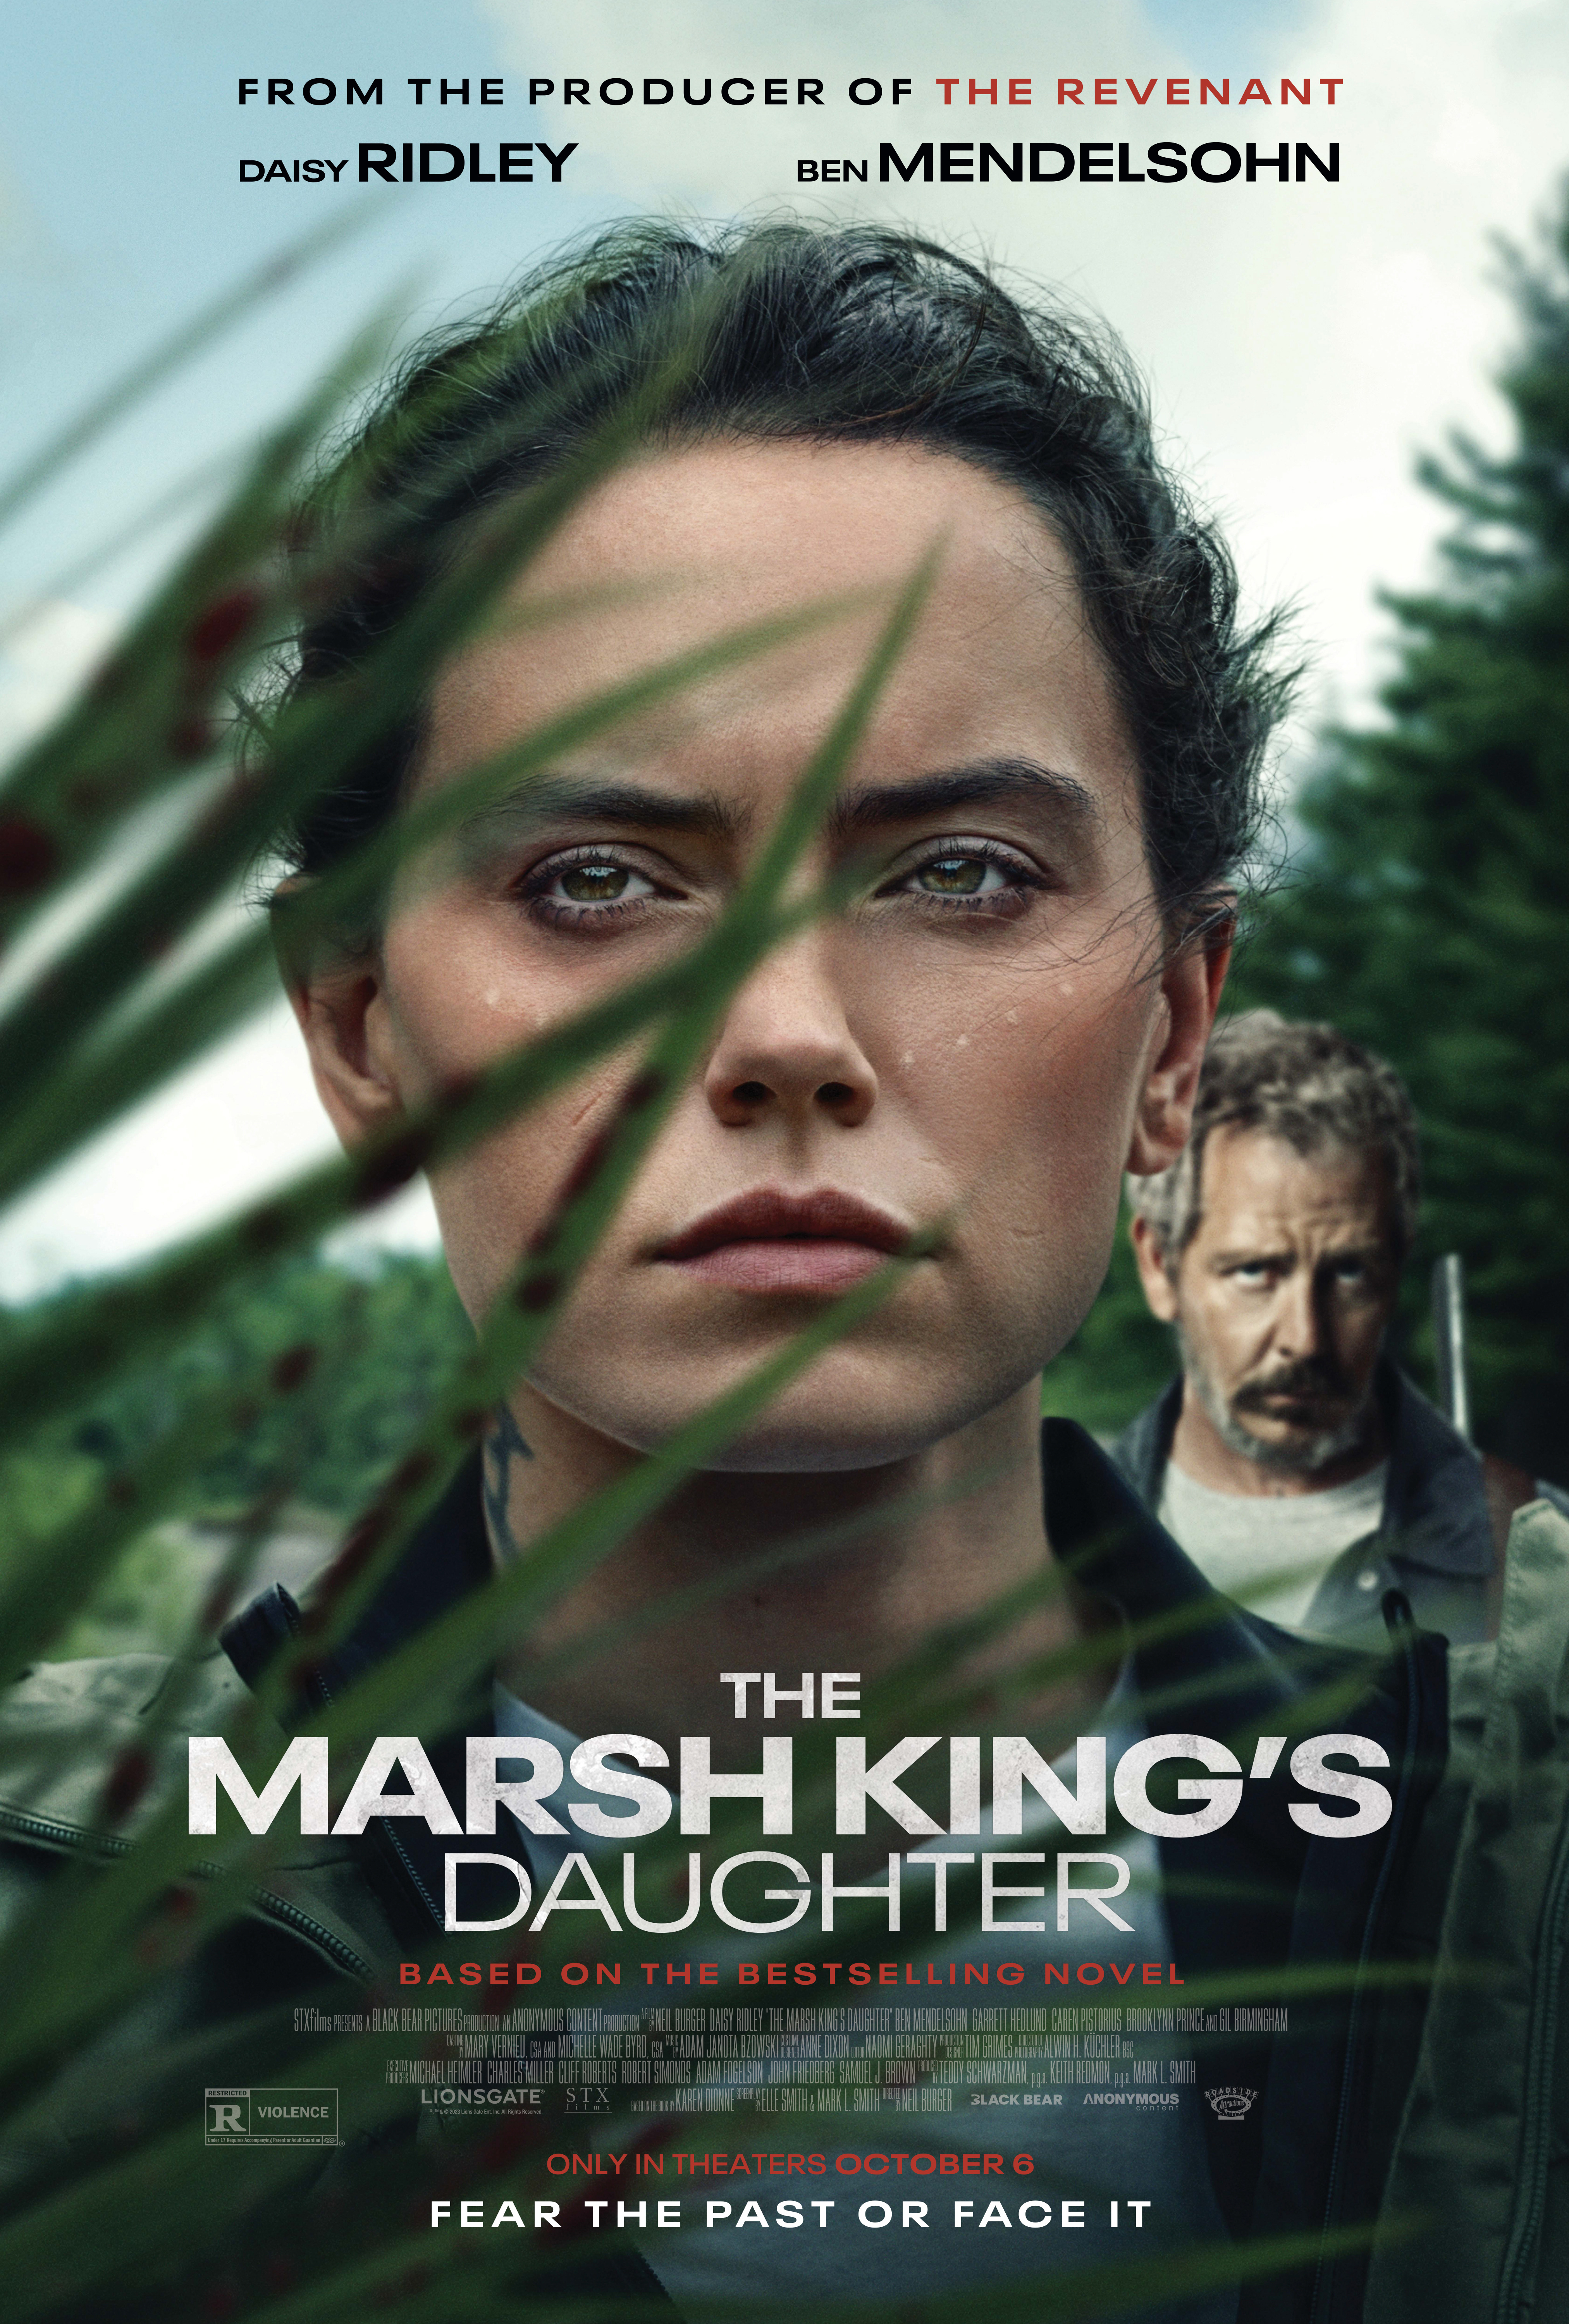 il poster di the marsch king's daughter - nerdface